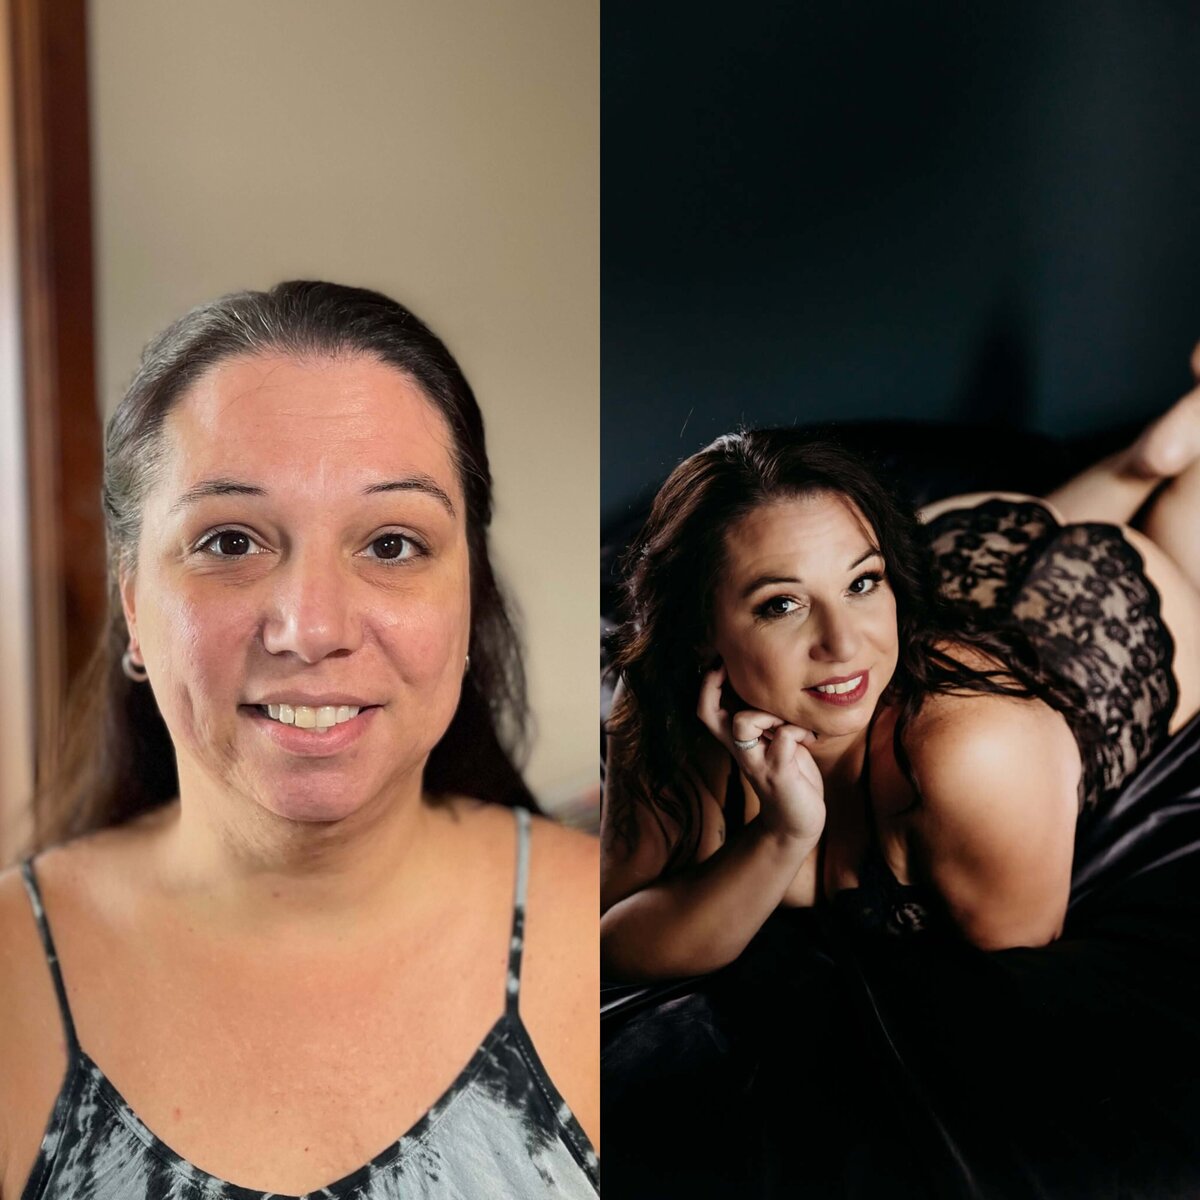 two images of a woman to show the difference professional make up offers for boudoir photography sessions